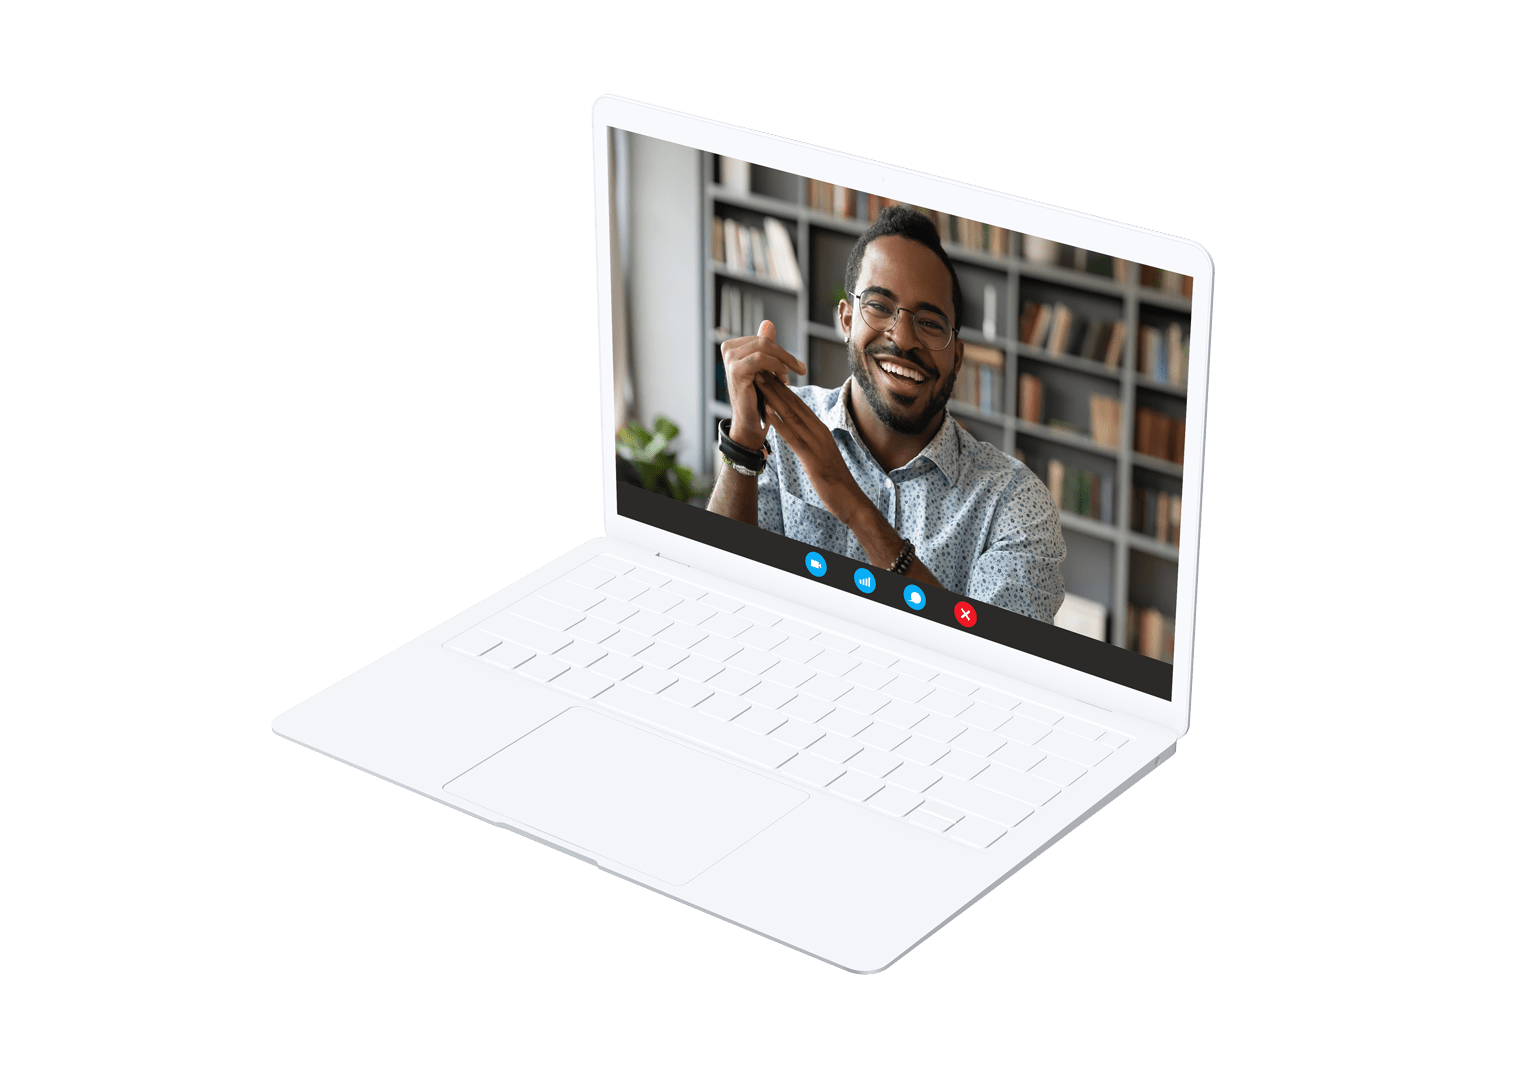 Laptop with a video call